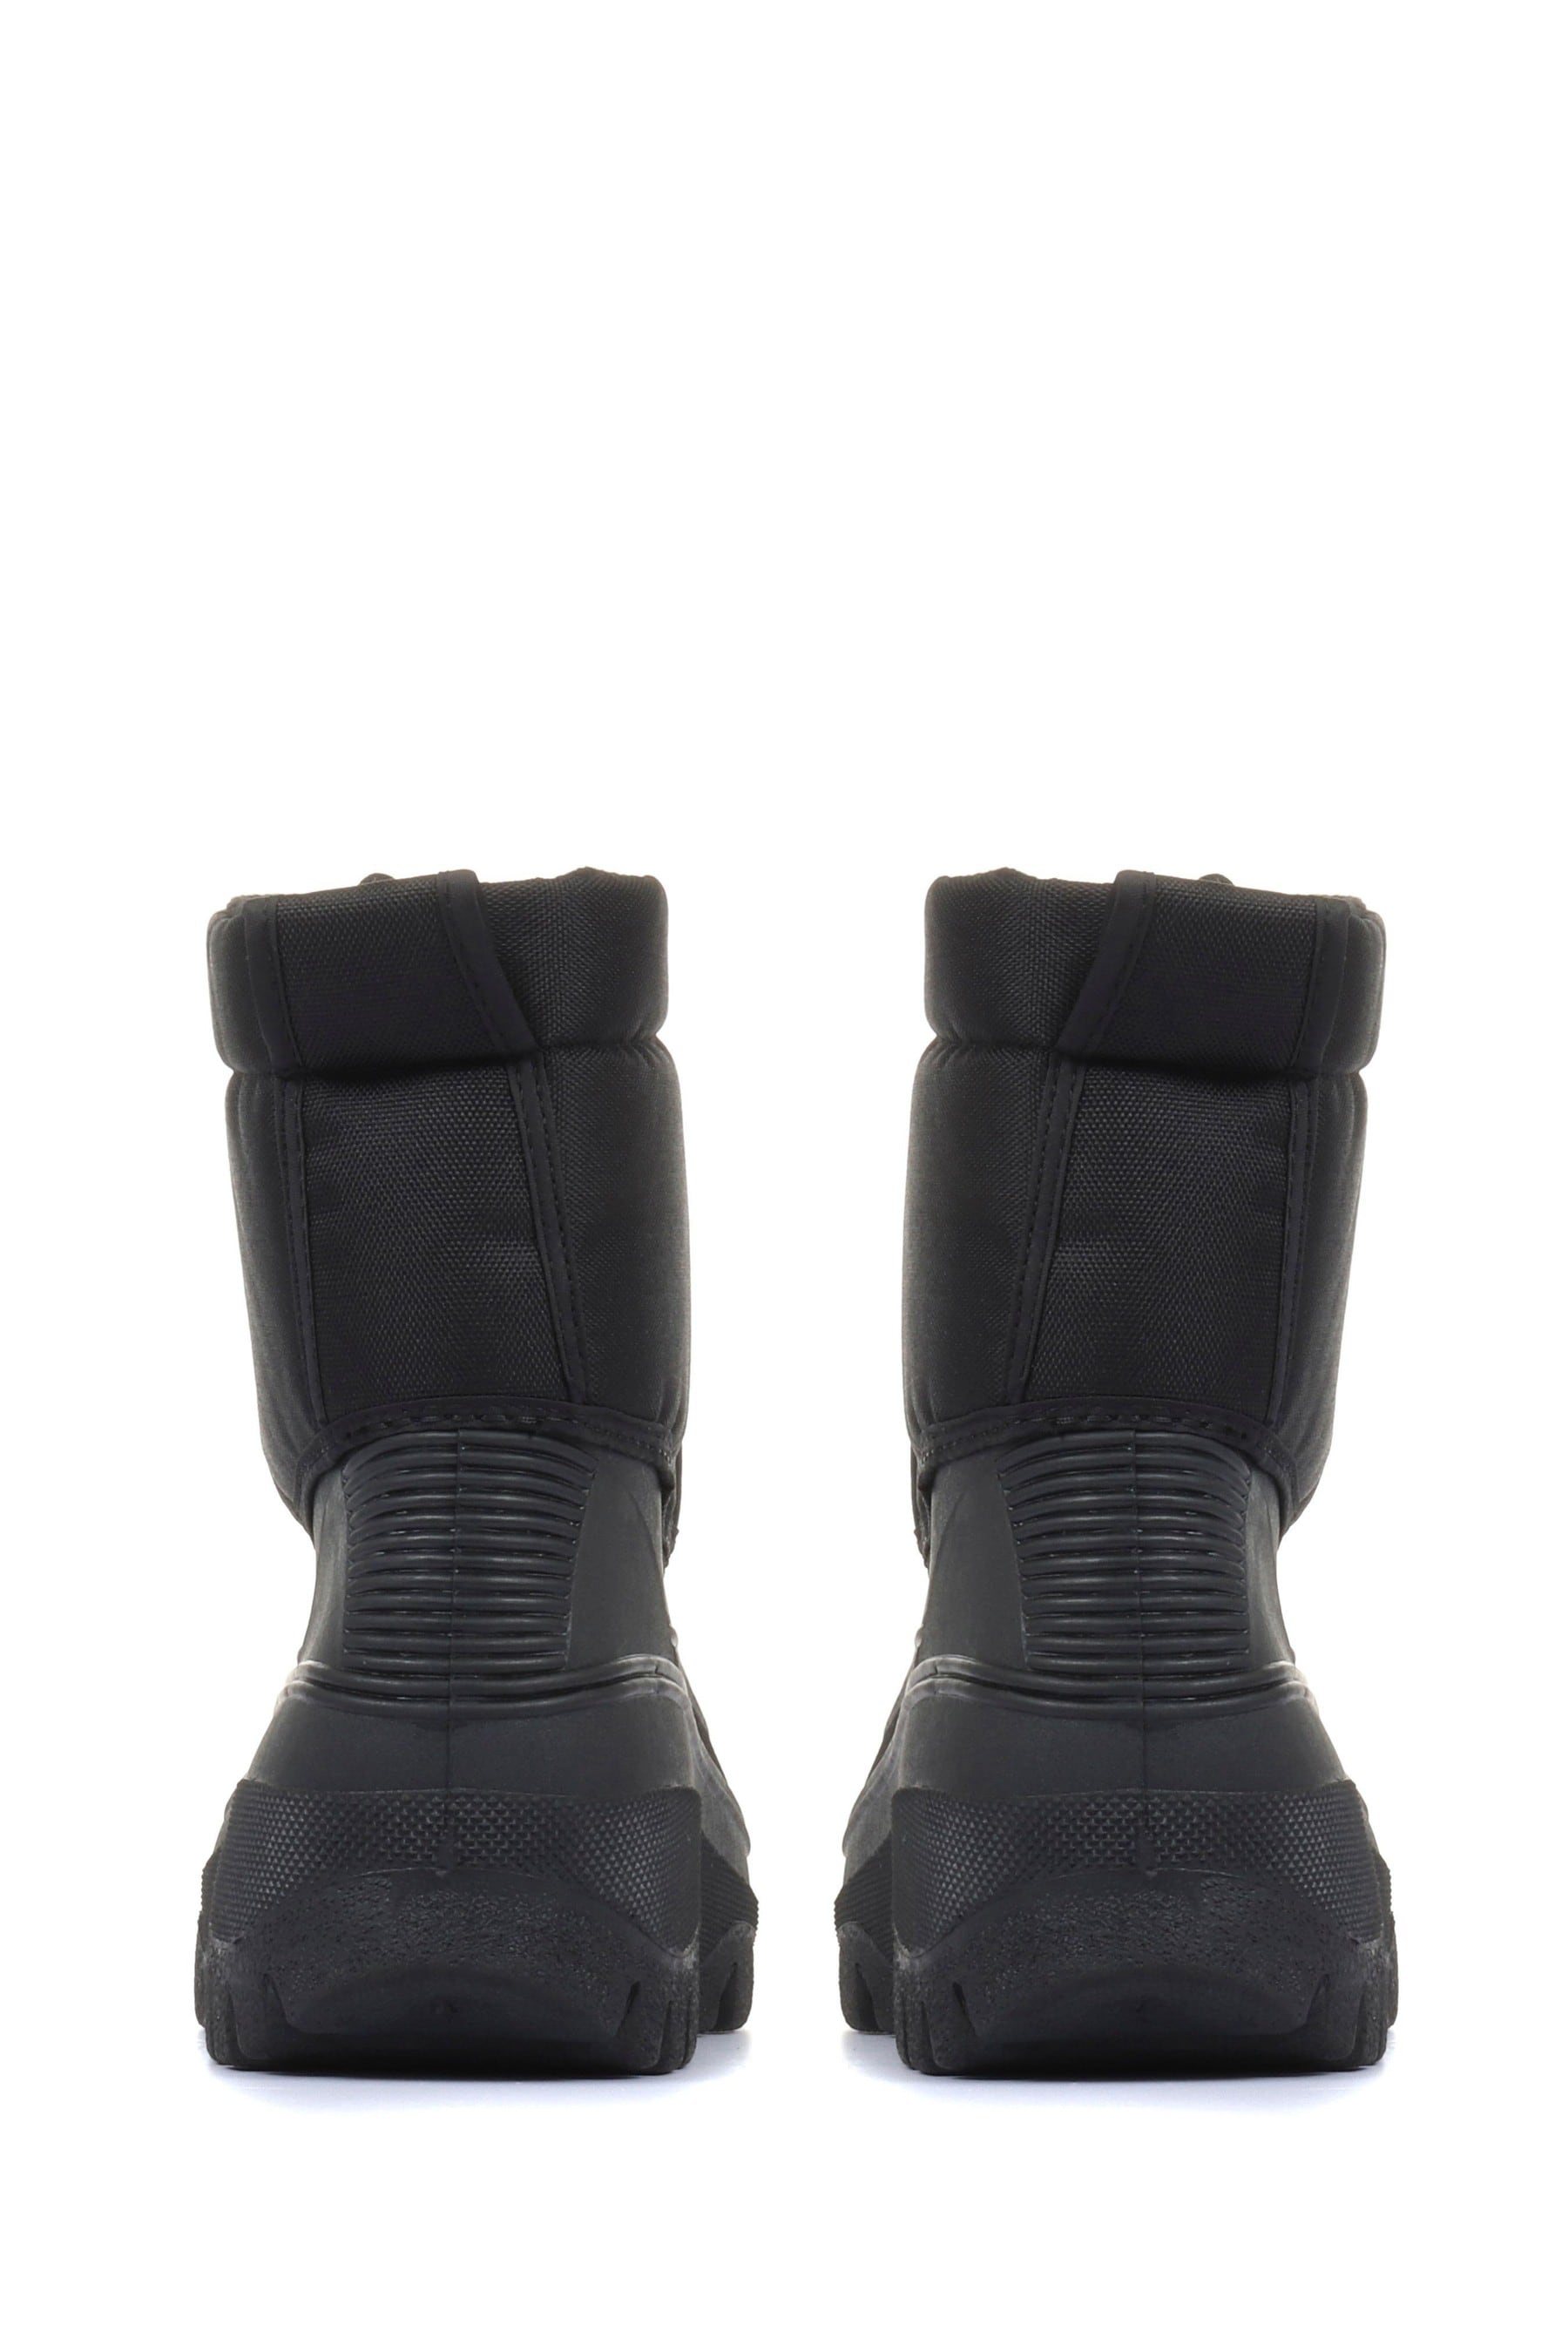 Buy Pavers Mens Black Wide Fit Snow Boots from the Next UK online shop